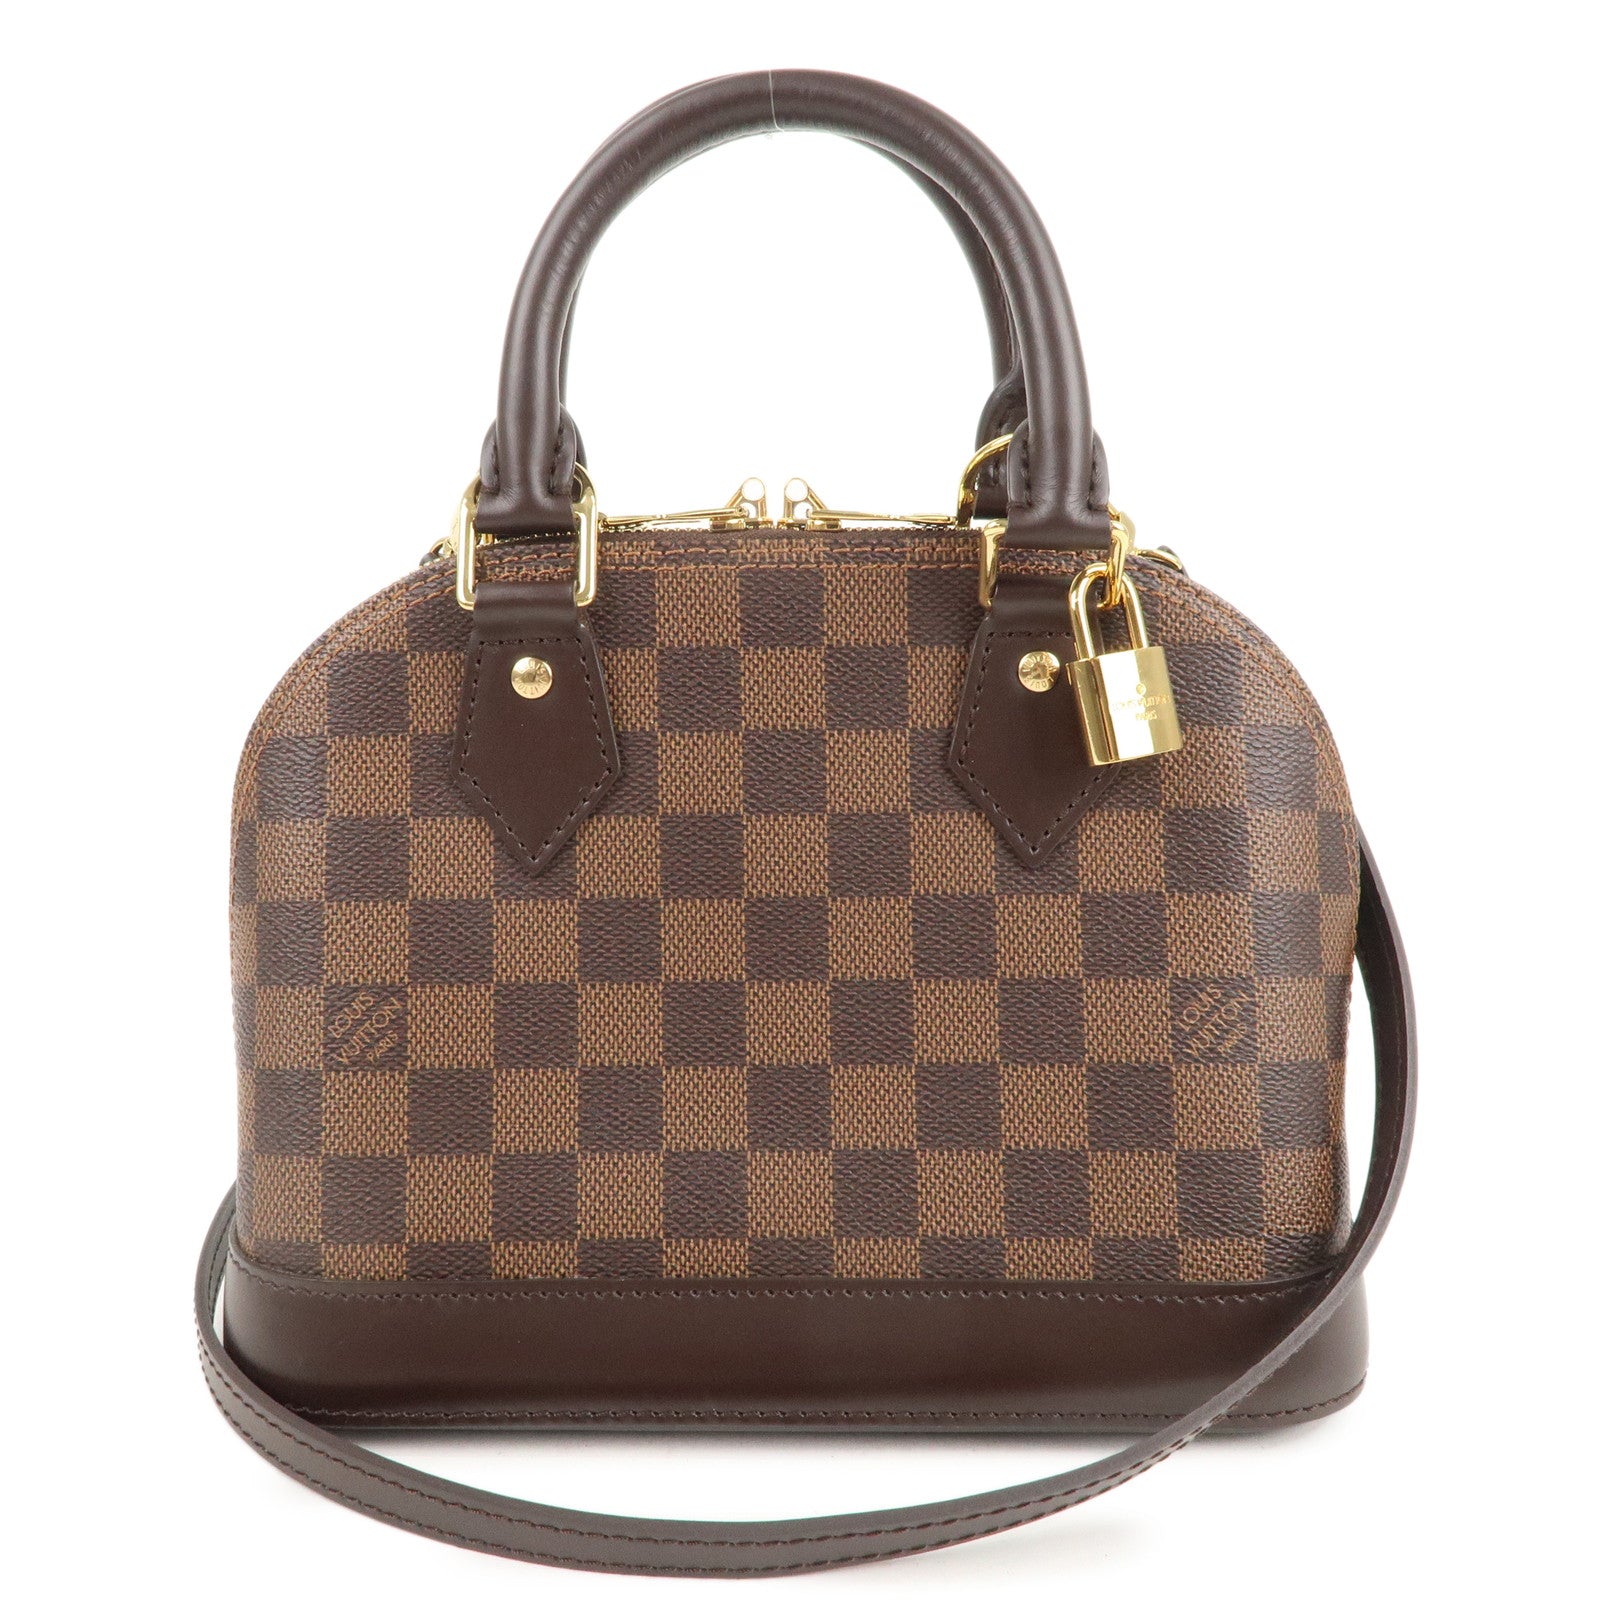 Alma bb leather crossbody bag Louis Vuitton Brown in Leather